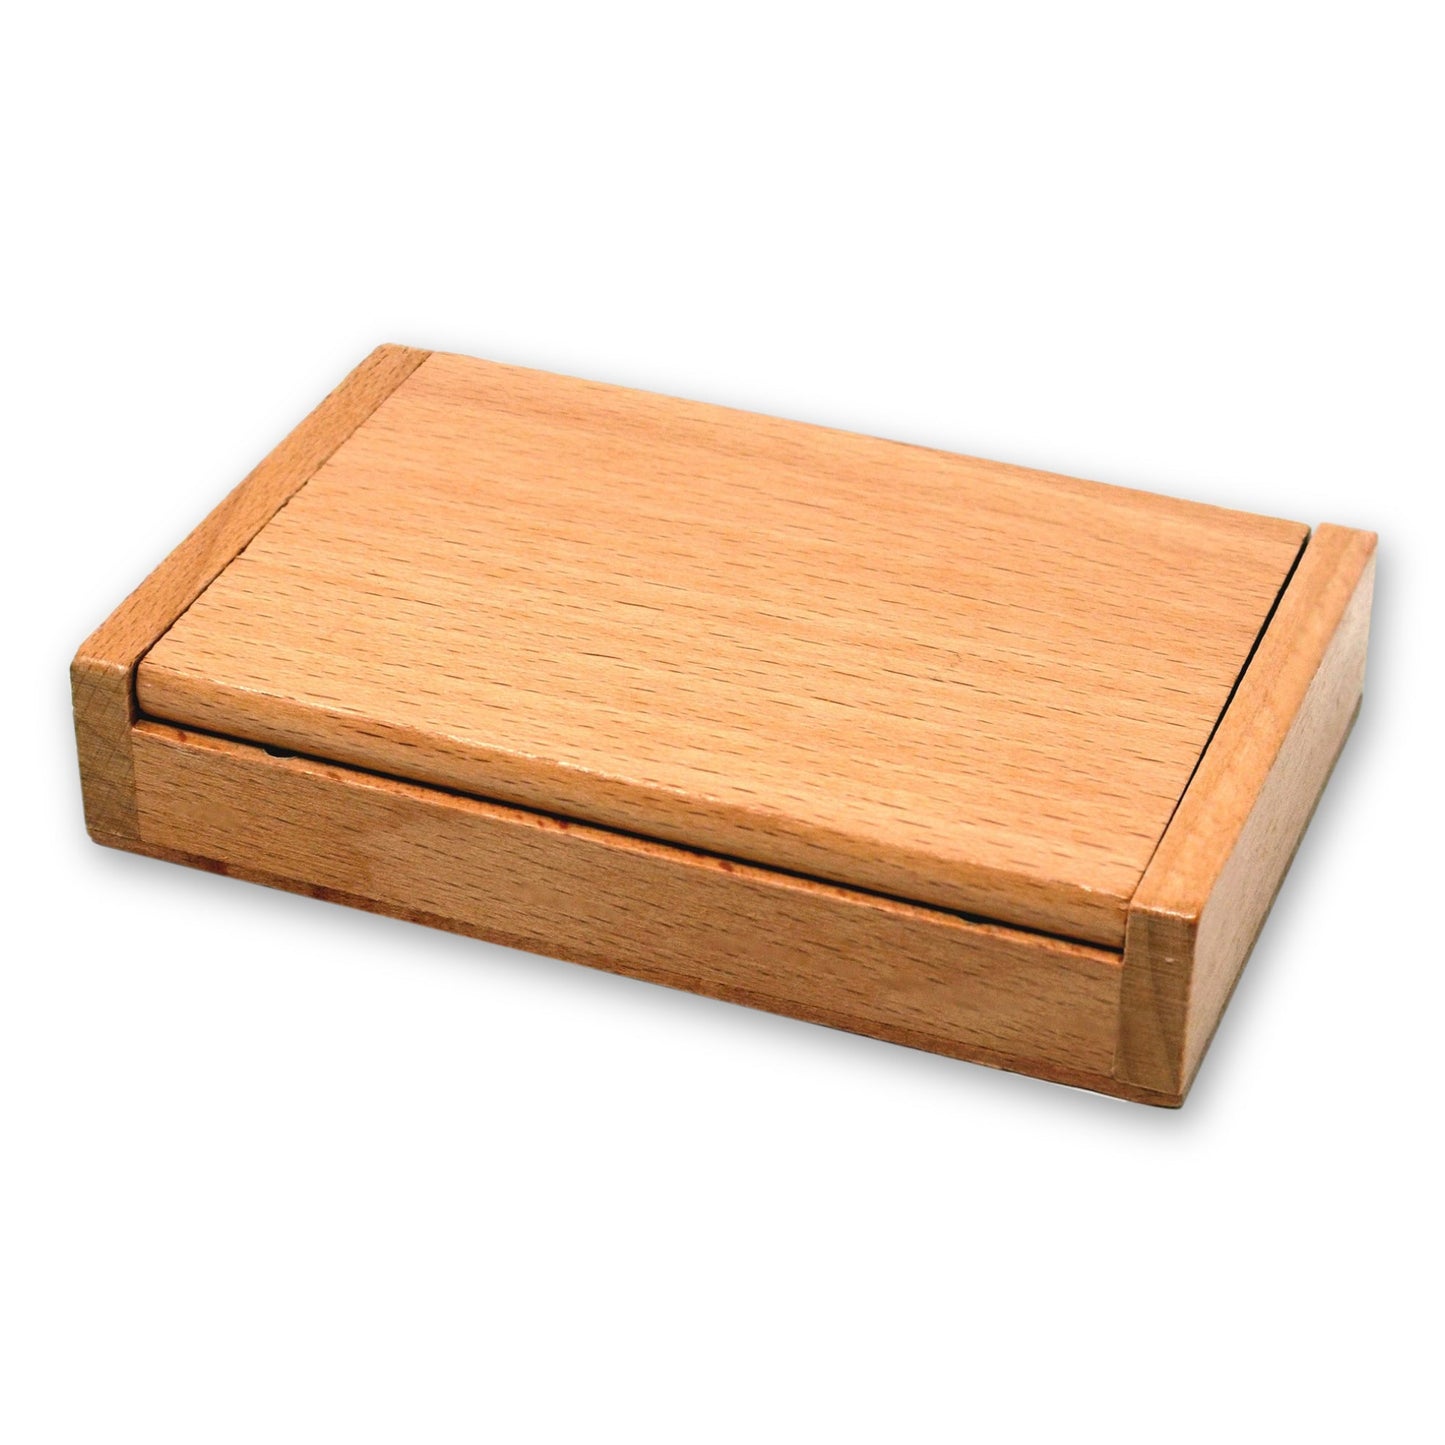 Overhead image of a closed Shut The Box Wooden Dice Game